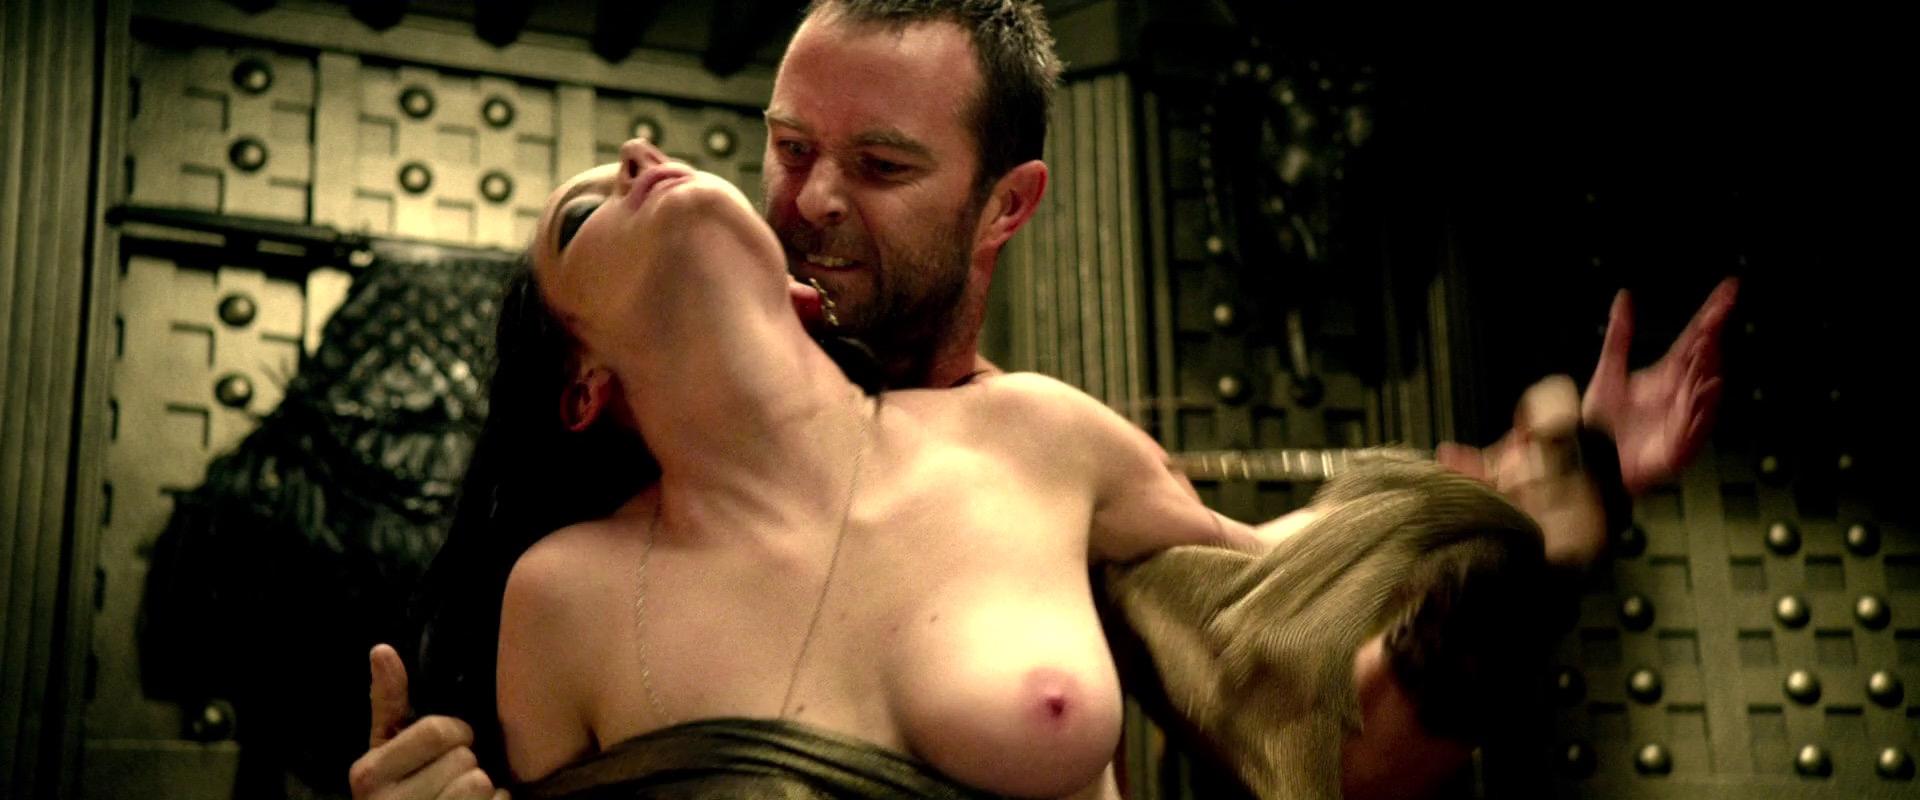 300 rise of an empire nude